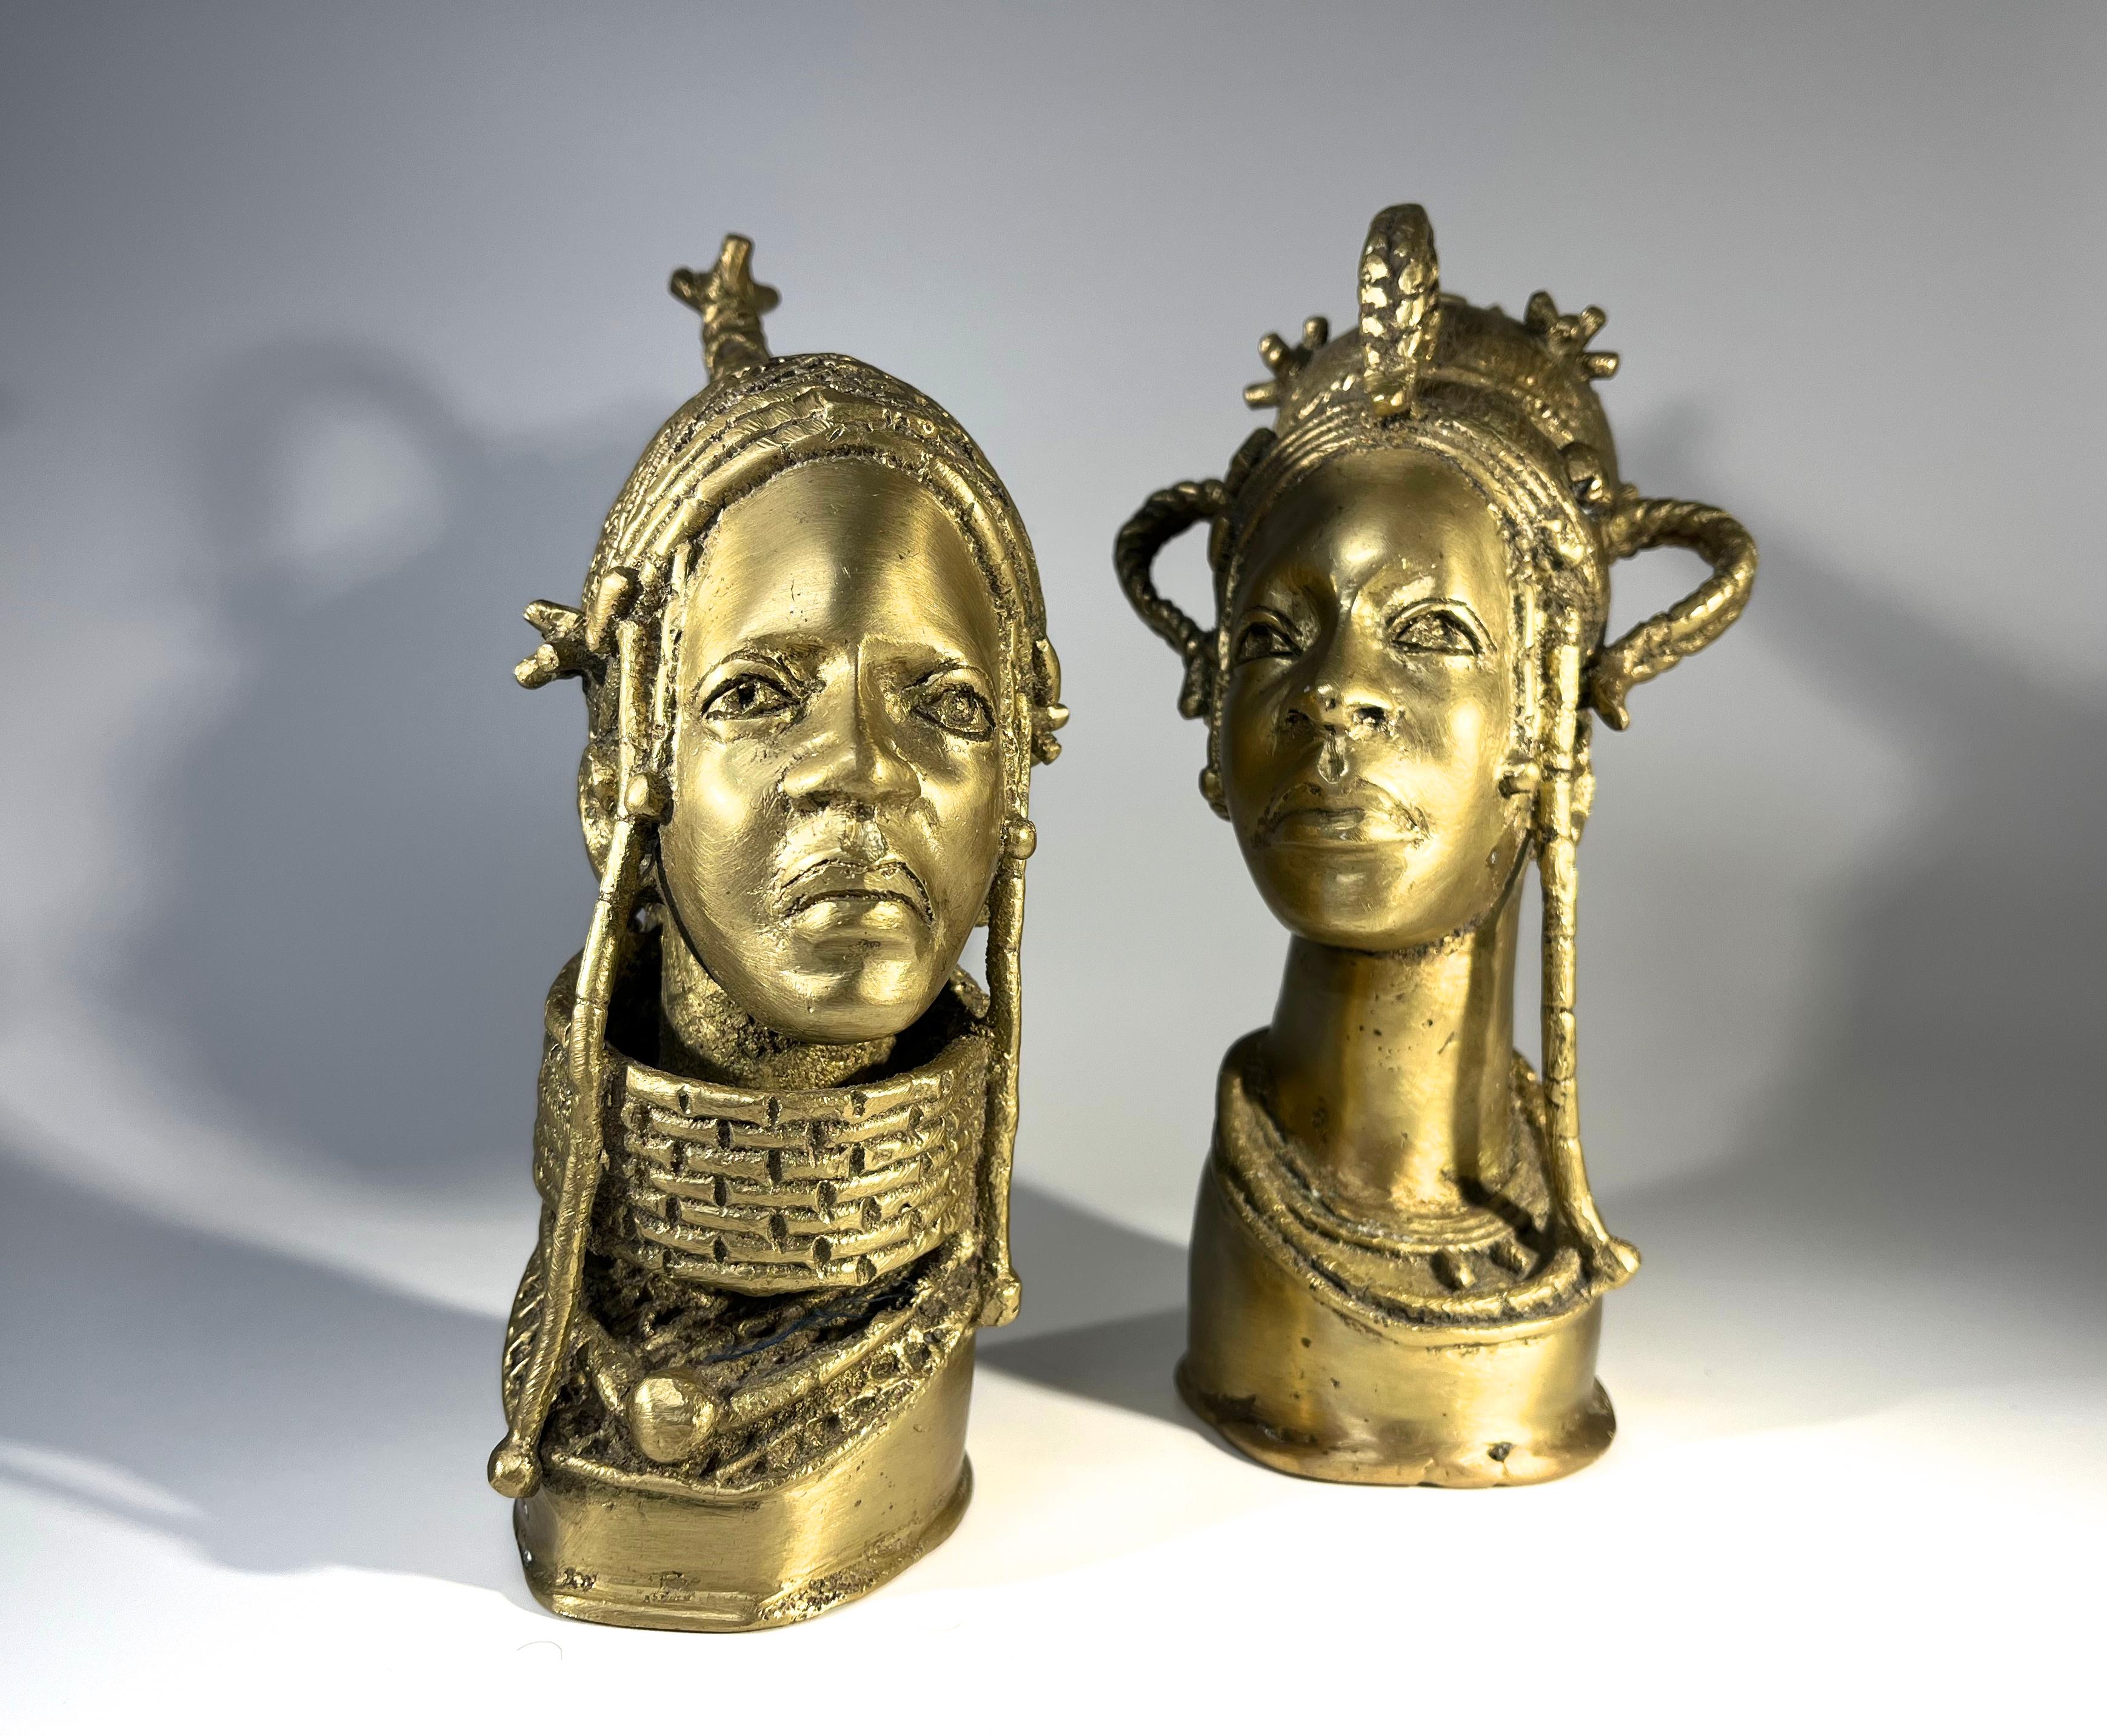 Outstanding Benin Oba and his Queen, Lost Wax 'Bronze' Sculptures from the late 20th century
Superbly cast and highly decorative contemporary pieces, not historical 
The centuries old, the 'Lost Wax' method involves a mold created in wax and the